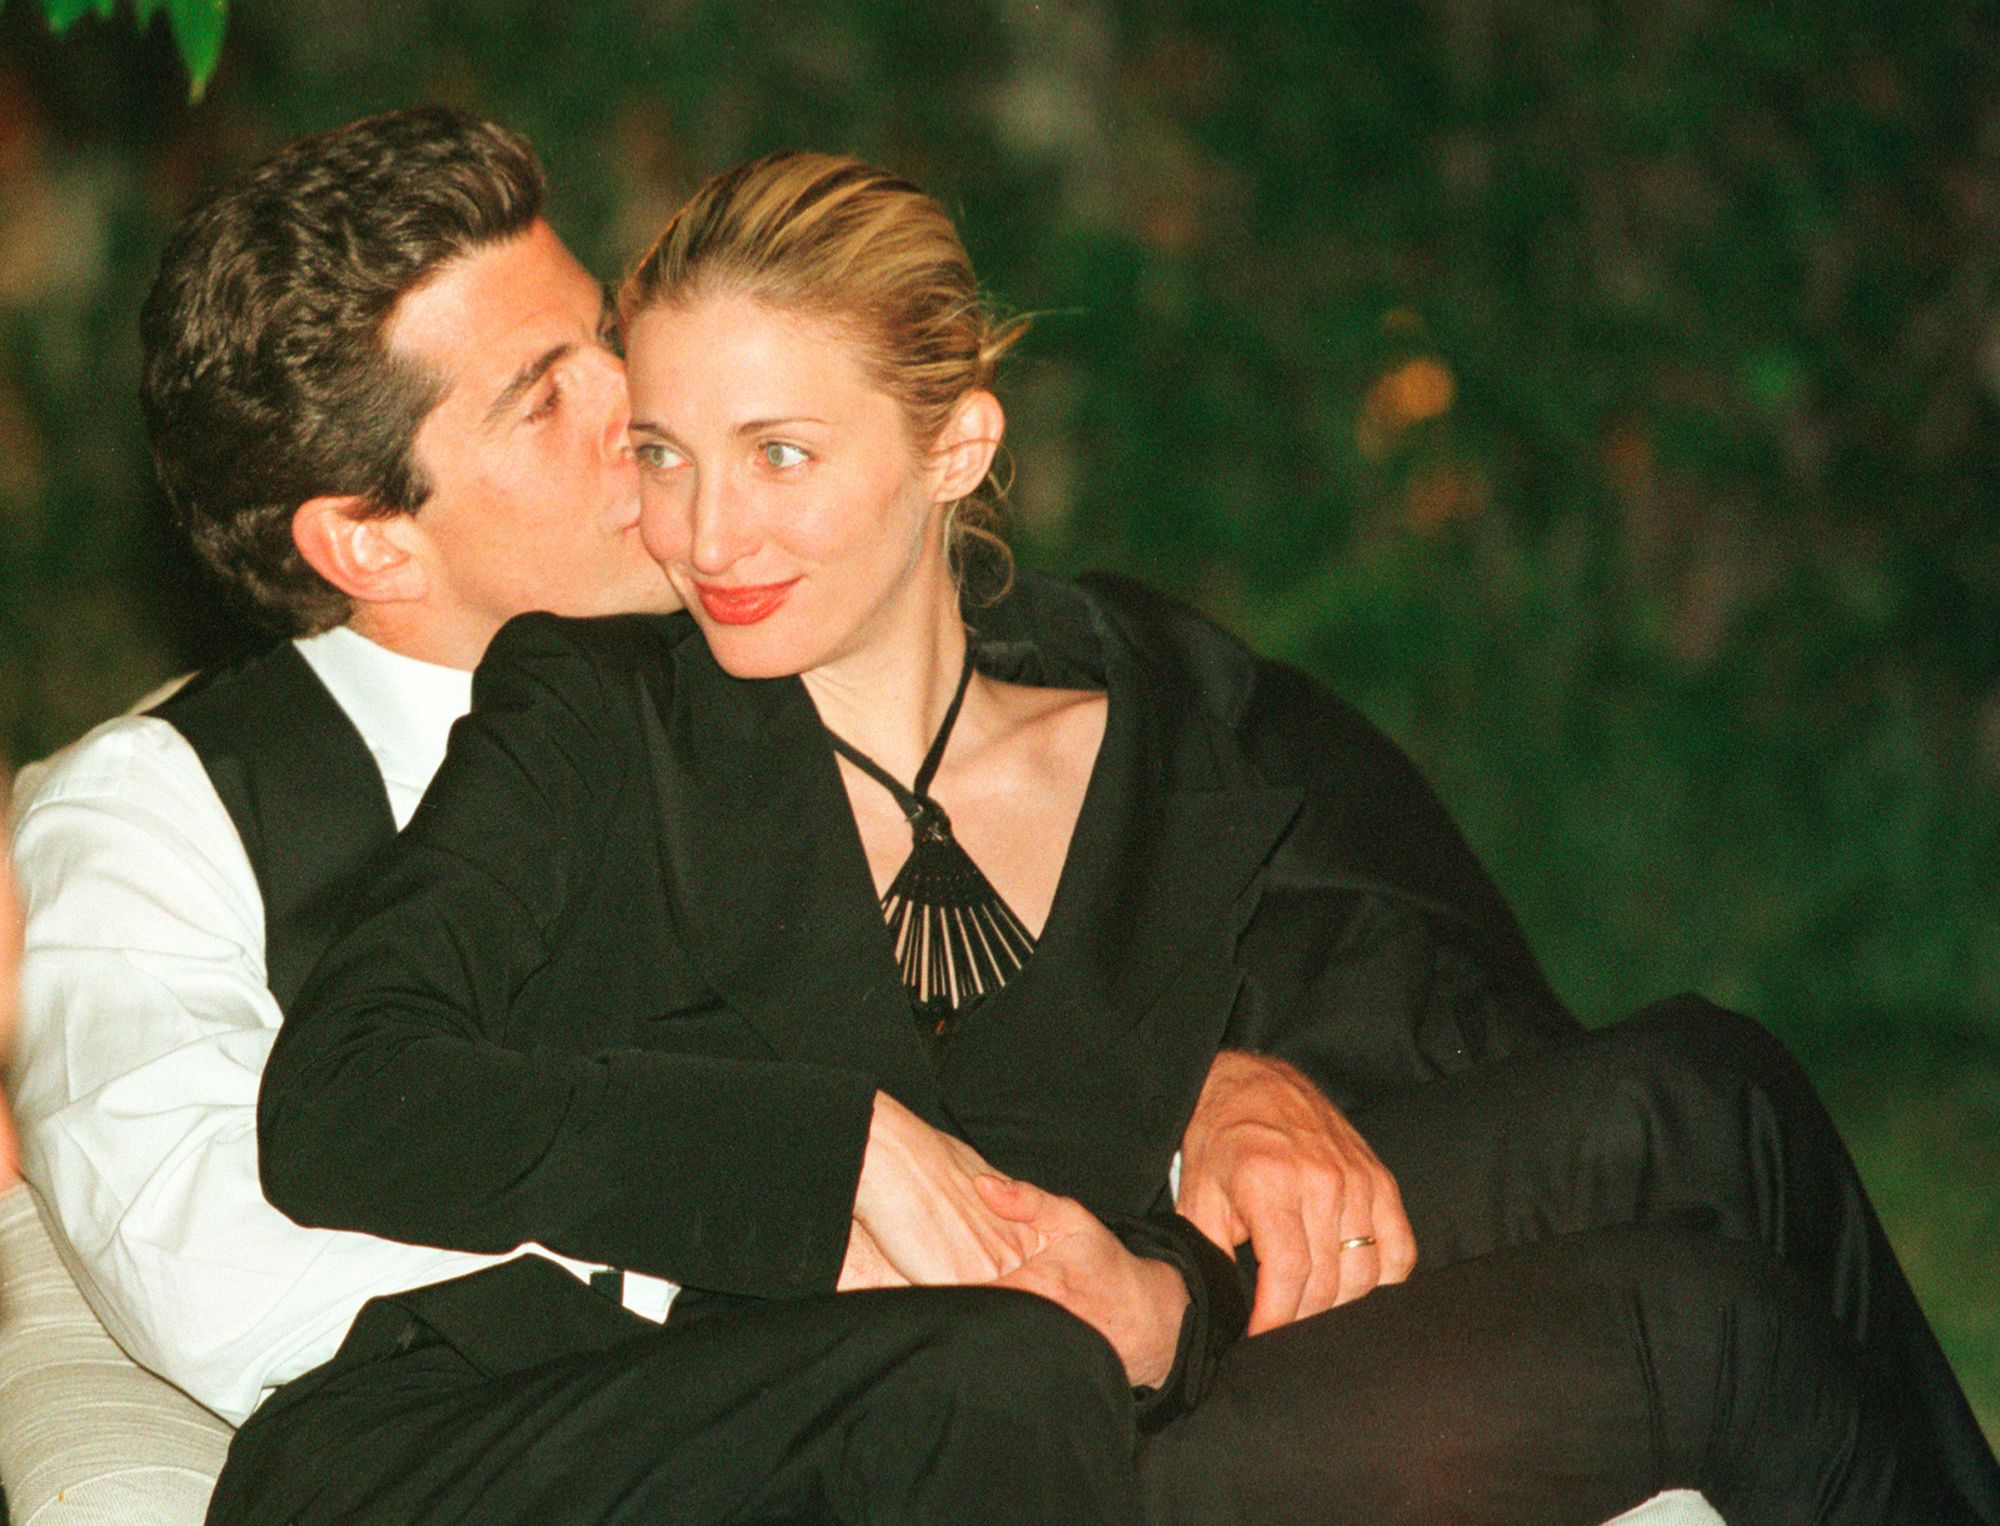 John F. Kennedy, Jr. and Carolyn Bessette Kennedy at the annual White House Correspondents dinner in May 1999. Carolyn's enduring style is celebrated in a new book.